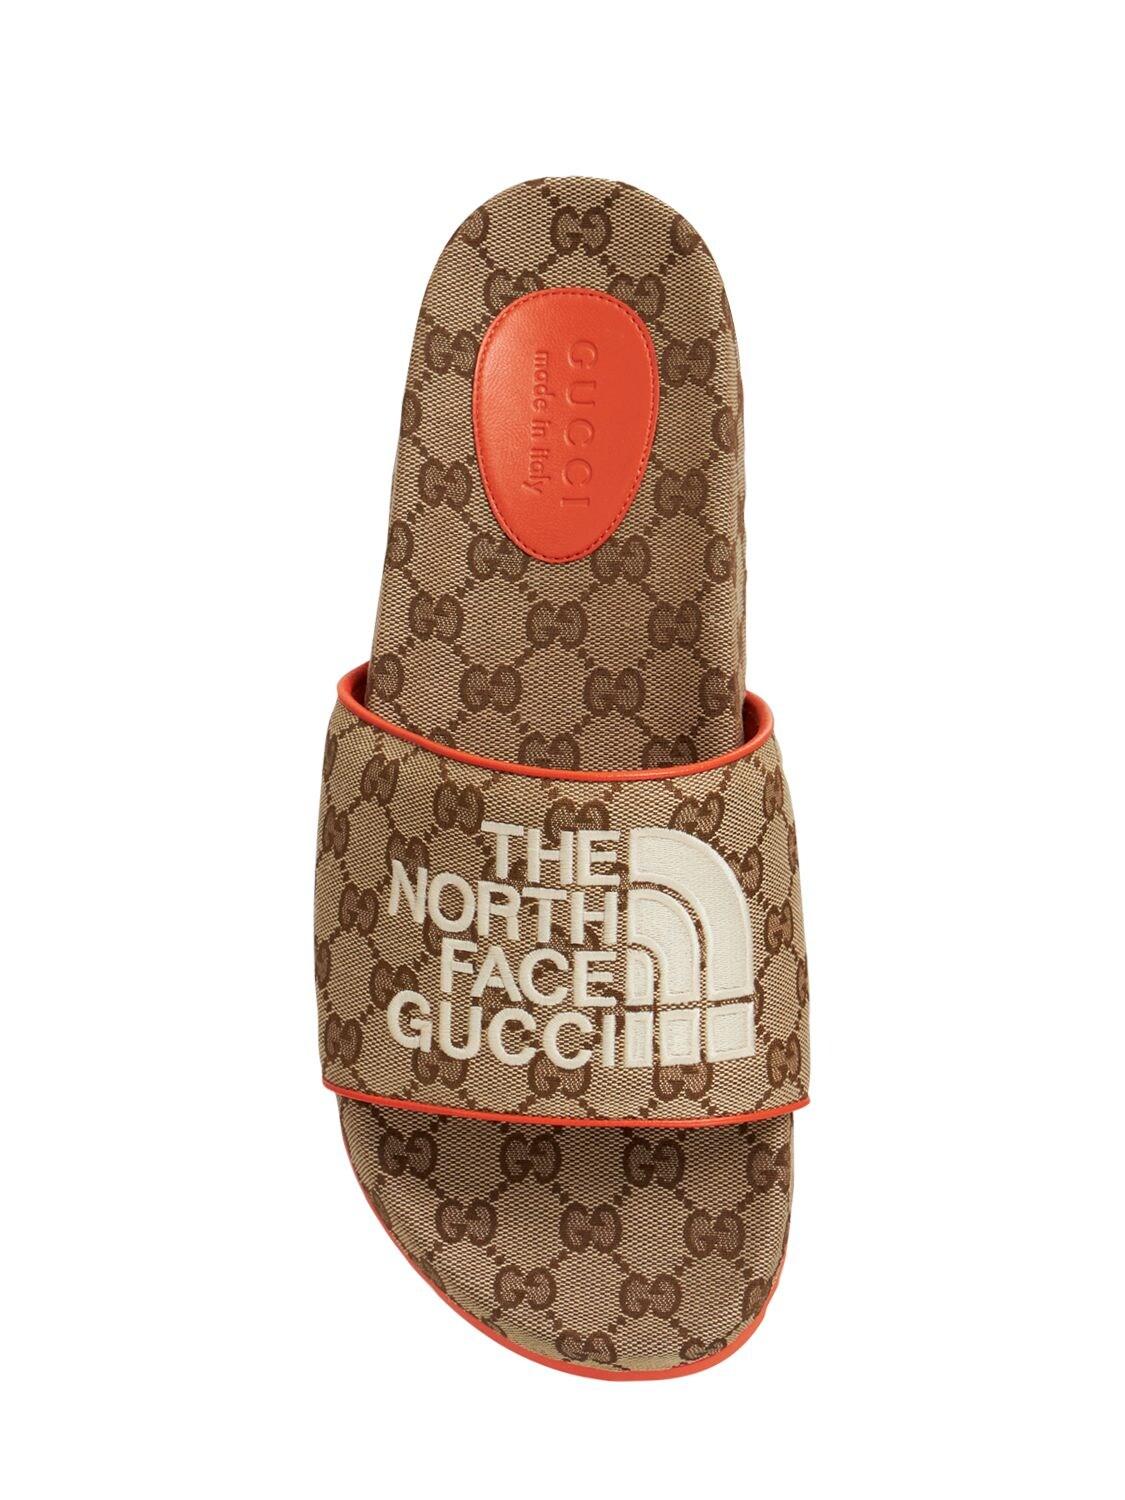 GUCCI x The North Face GG Canvas Slides Size 10-10.5 - clothing &  accessories - by owner - apparel sale - craigslist